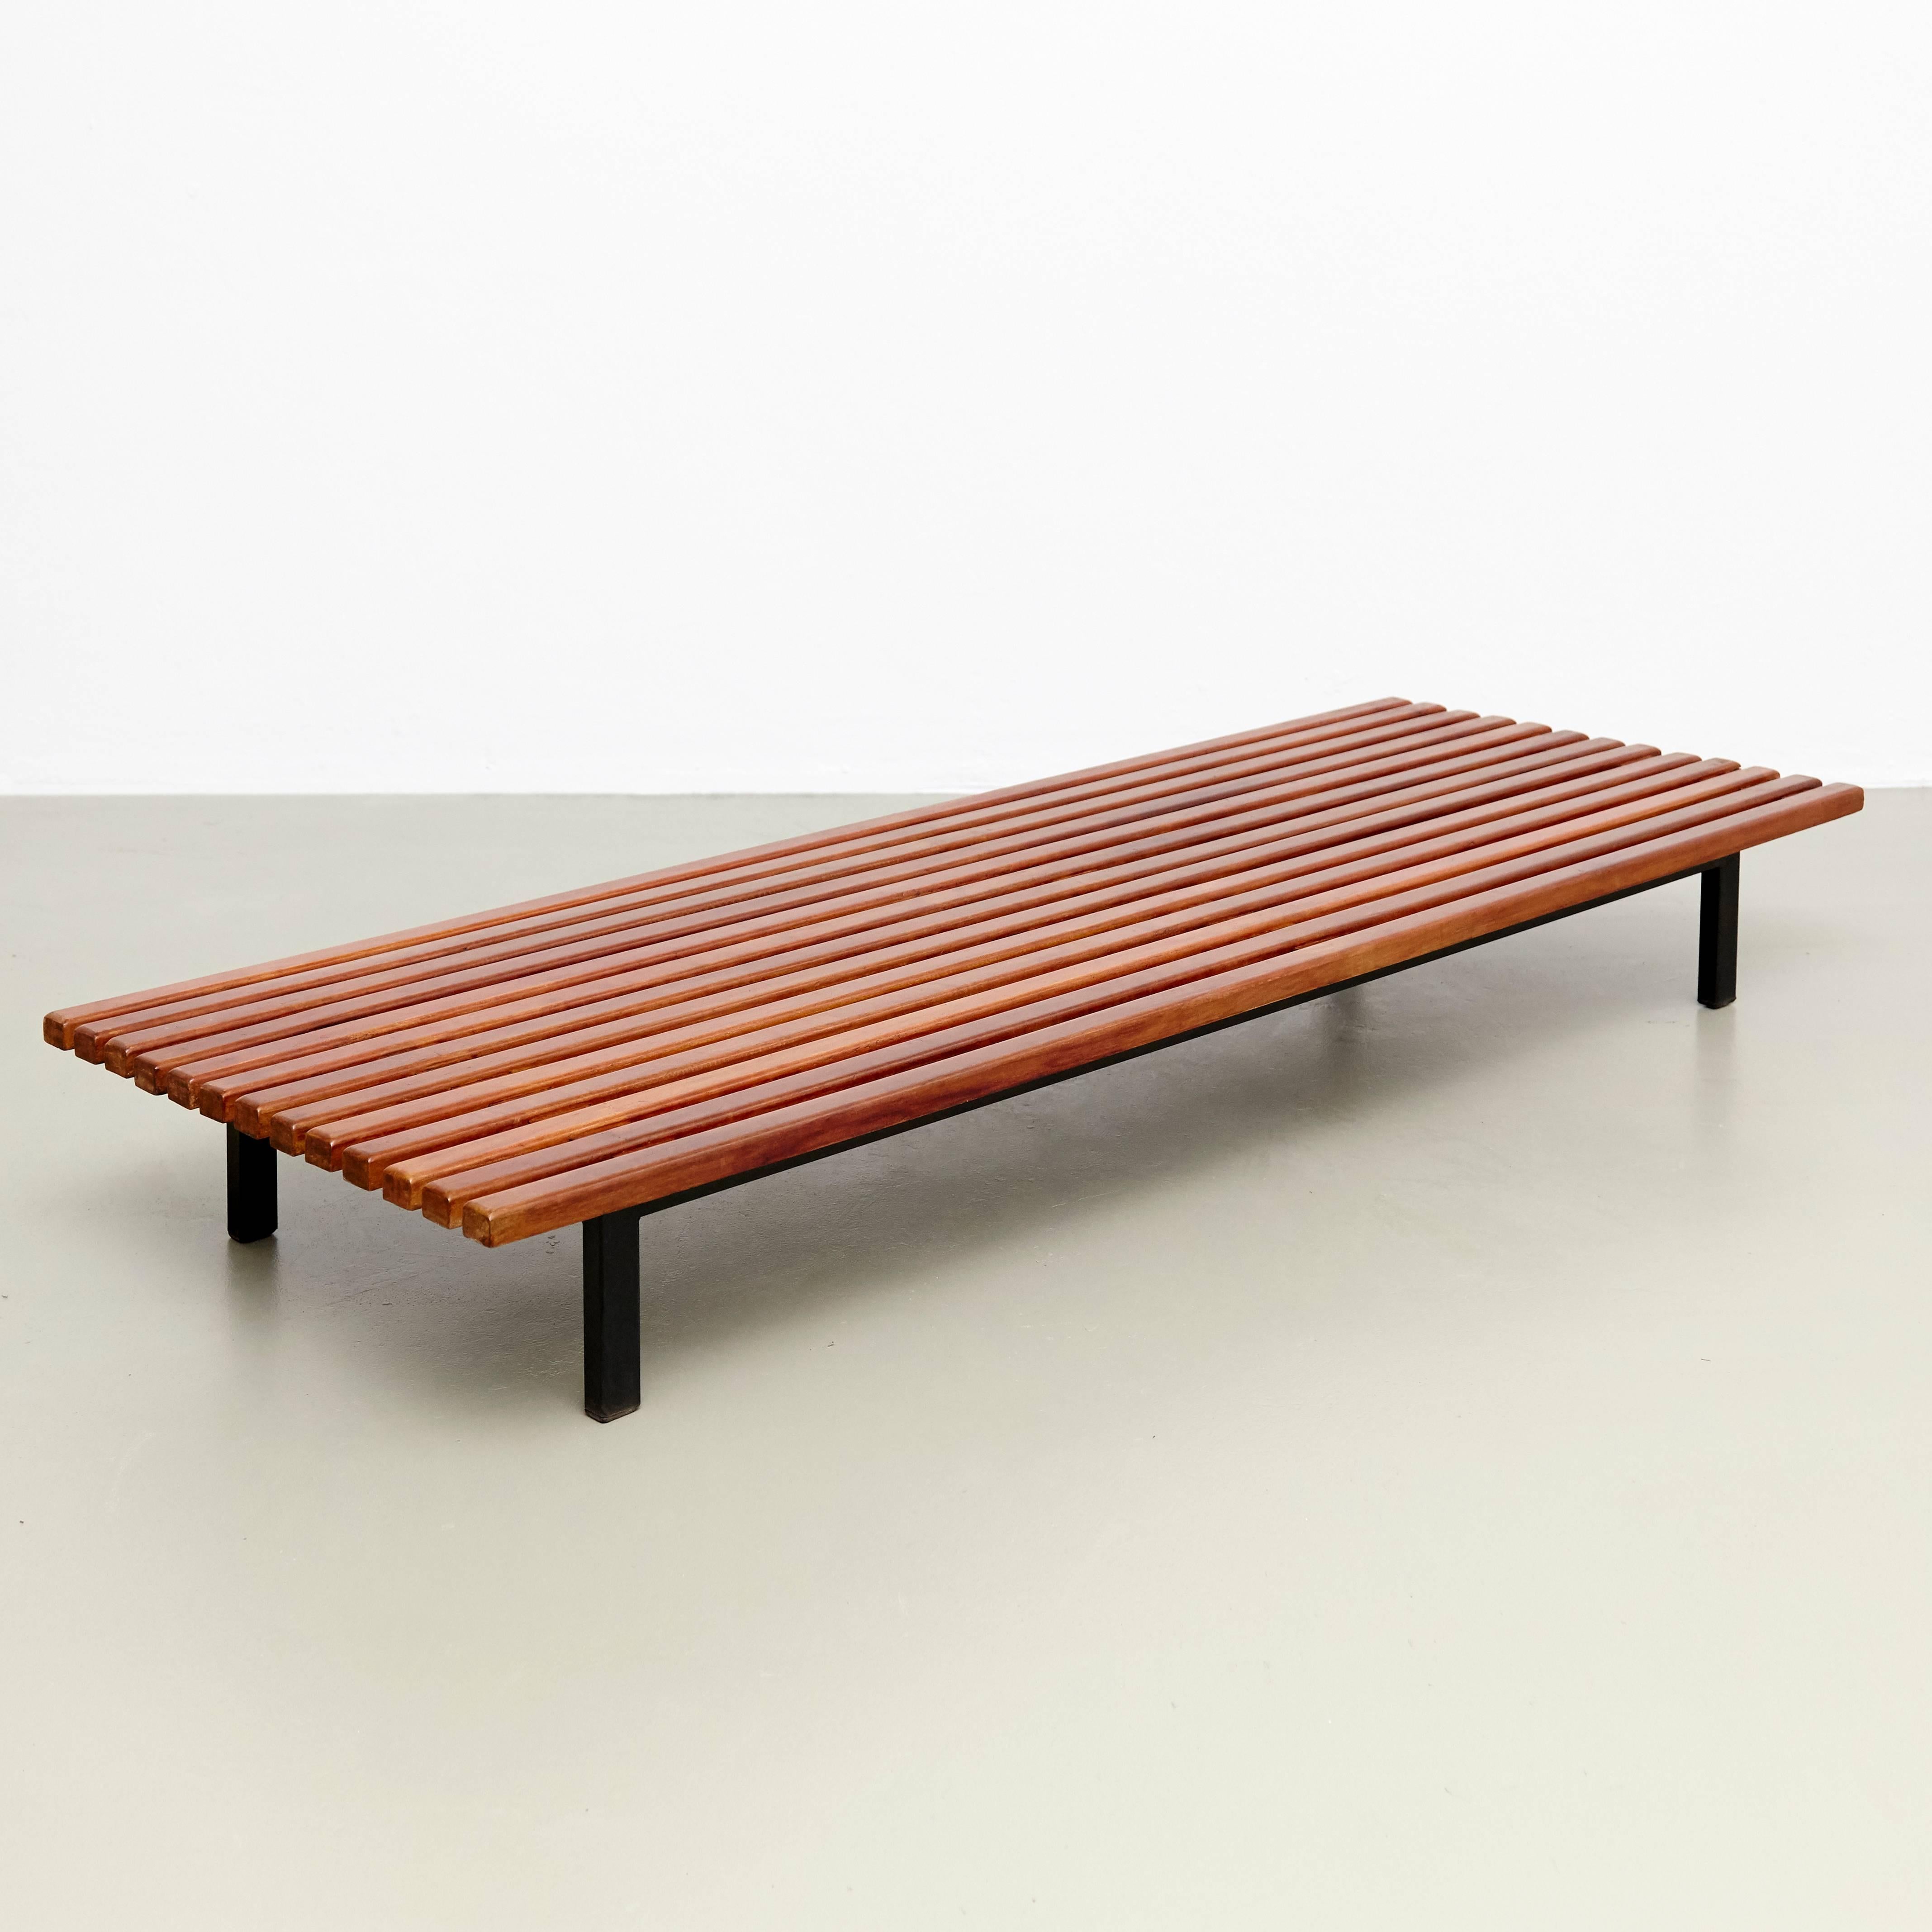 Bench designed by Charlotte Perriand, circa 1950.
Manufactured by Steph Simon (France) circa 1950.
Wood, lacquered metal frame and legs.

Provenance: Cansado, Mauritania (Africa).

In good original condition, with minor wear consistent with